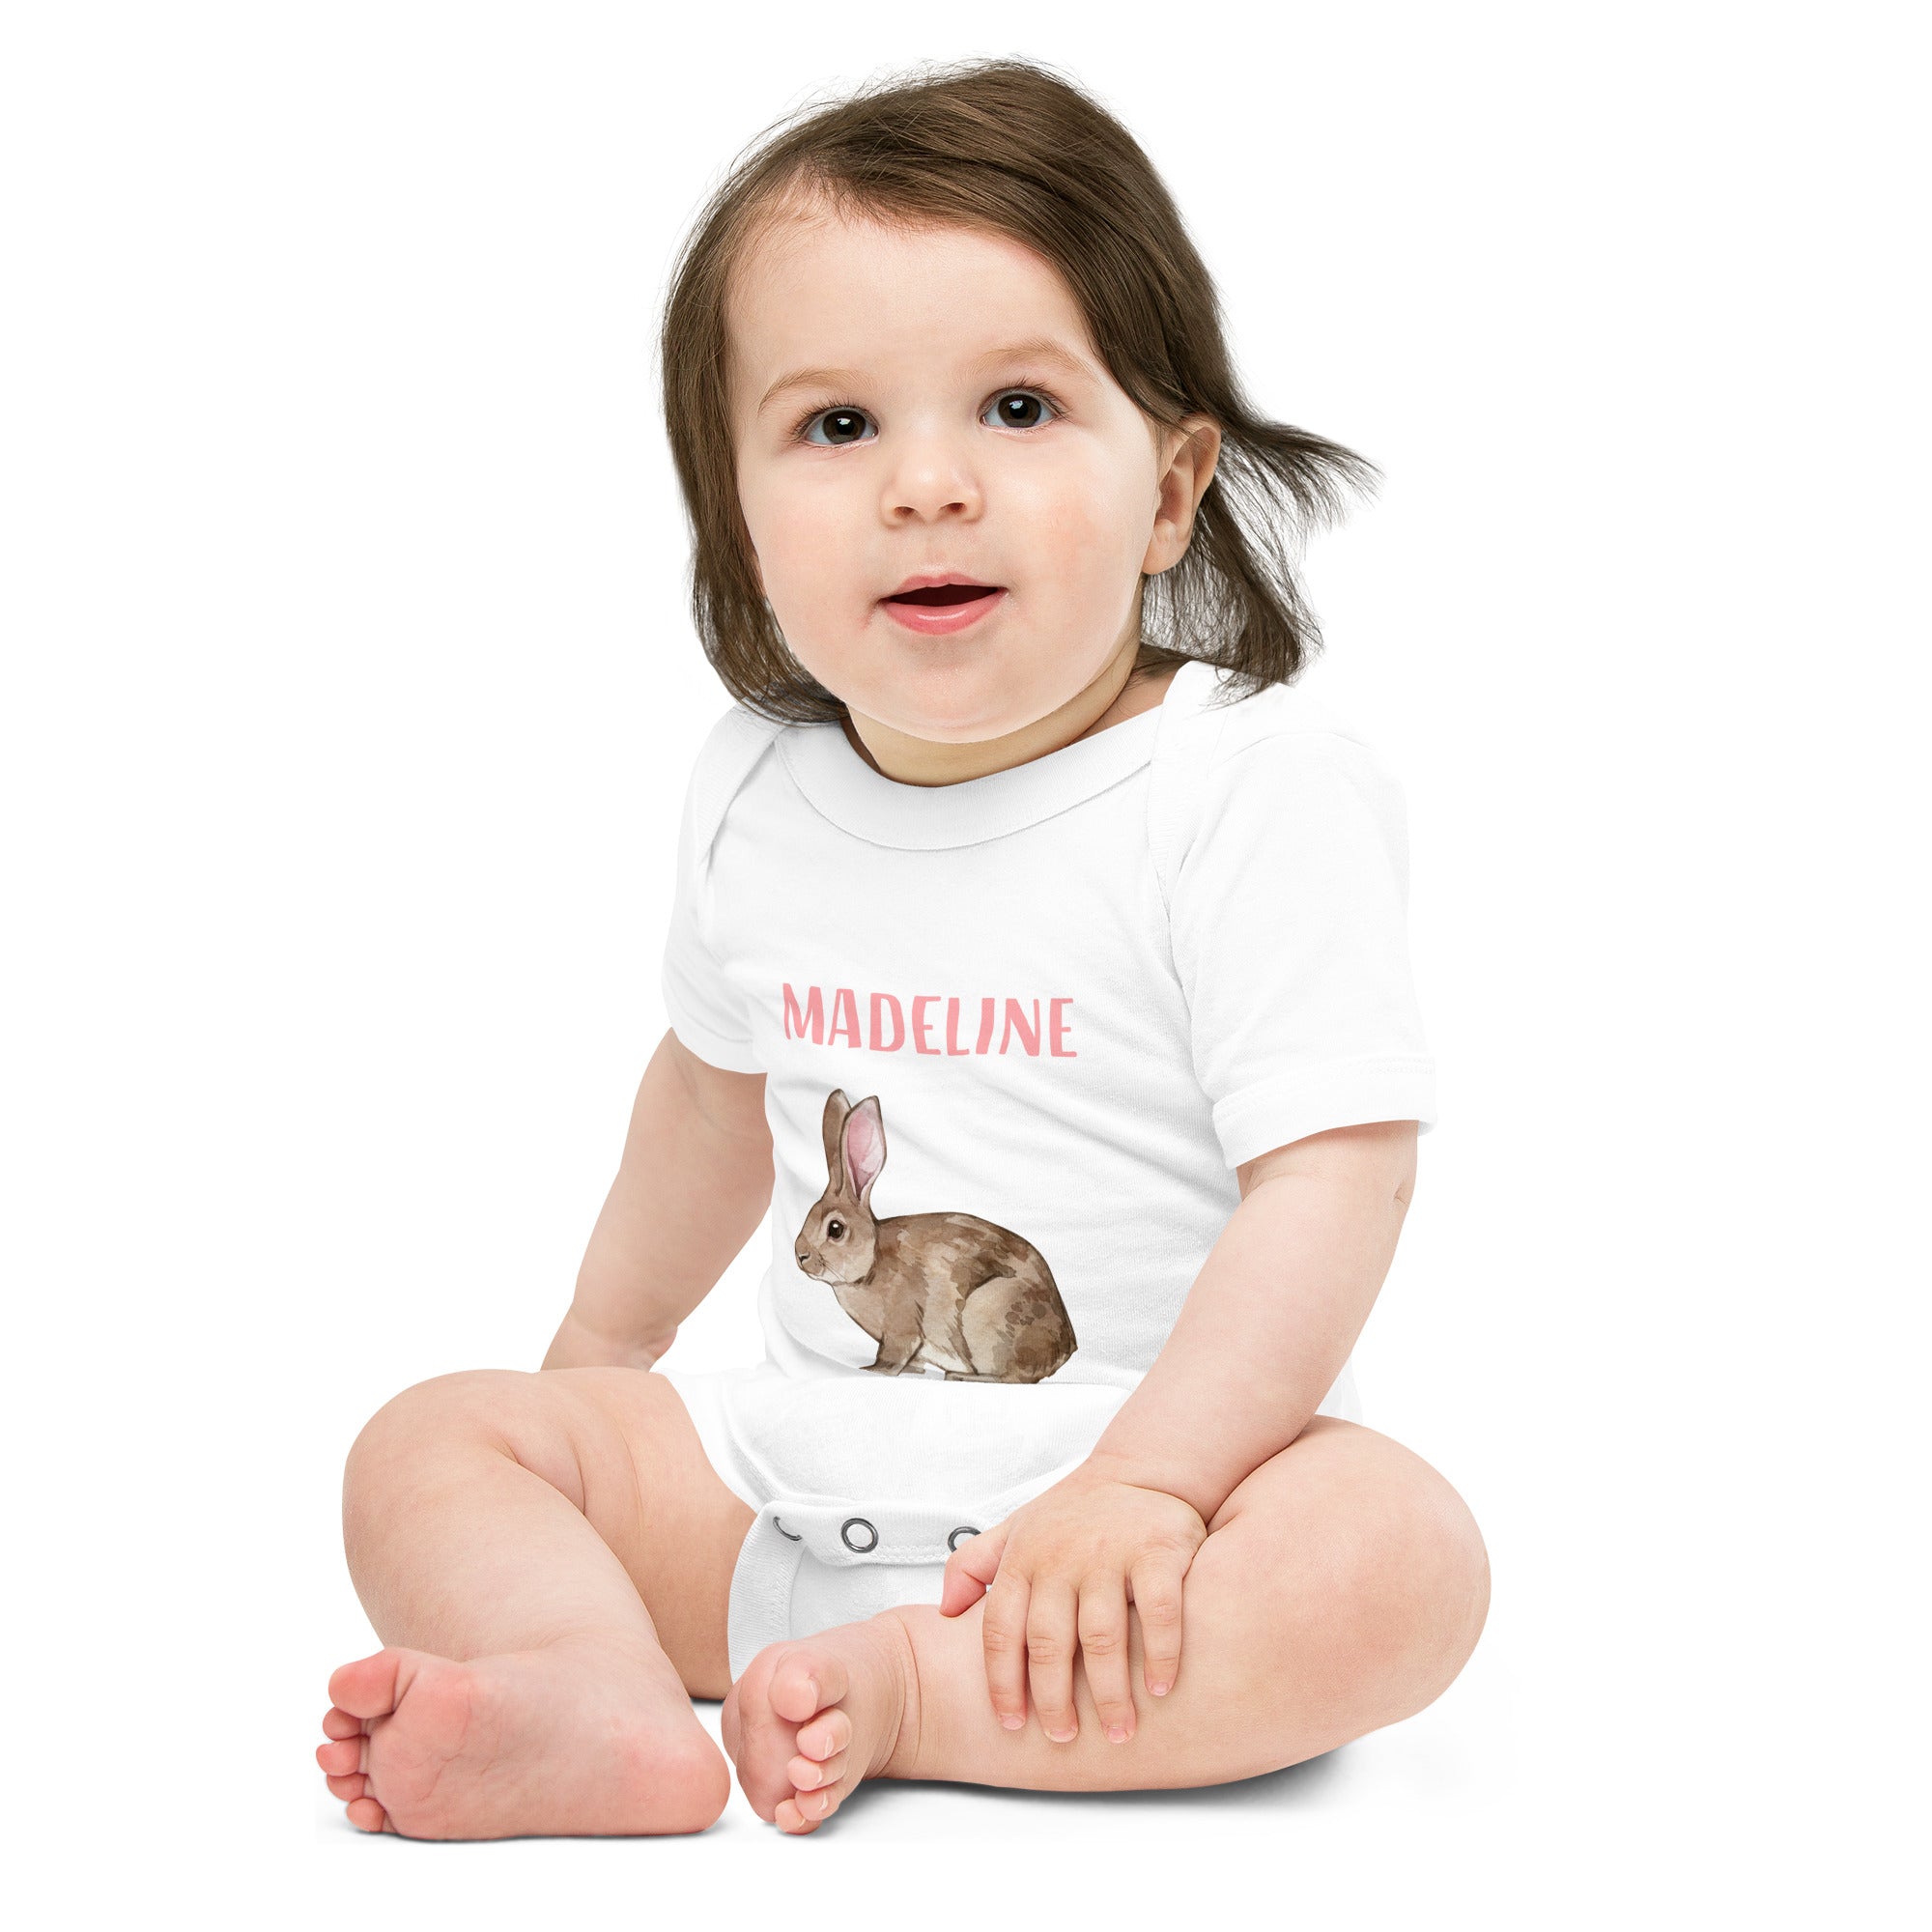 Baby wearing a white baby bunny one piece